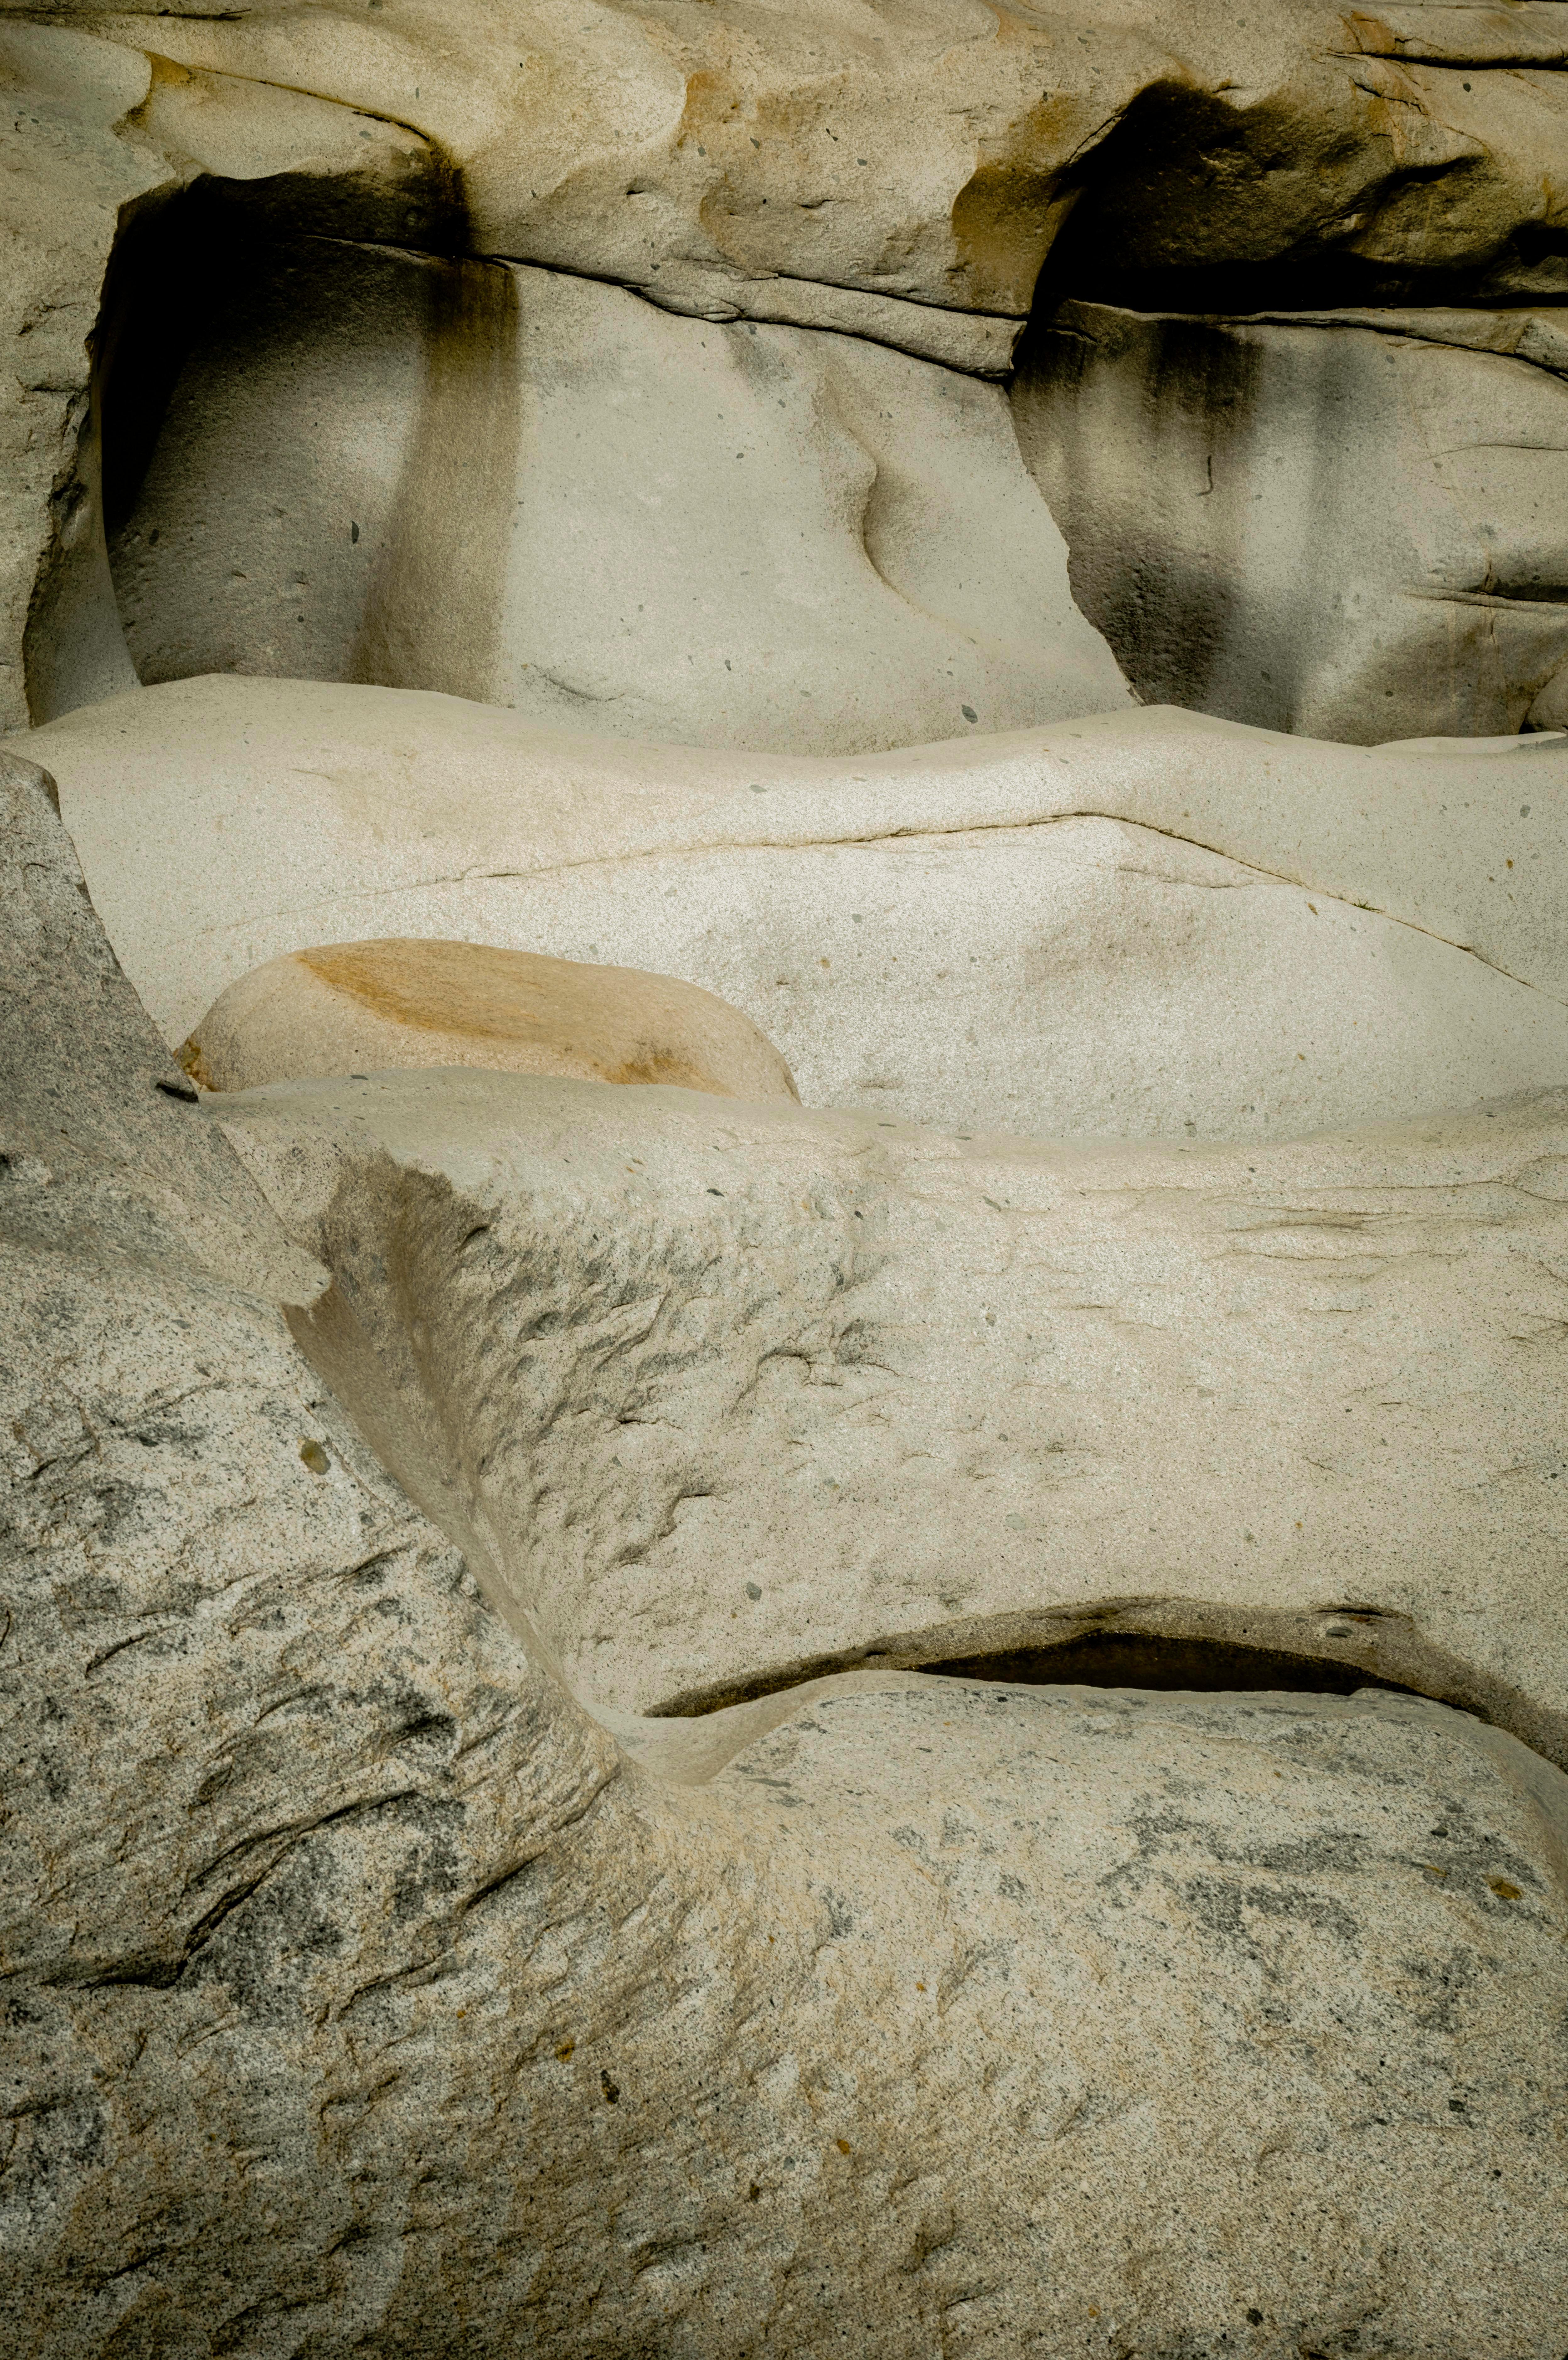 Mauricio Velez Color Photograph - Untitled III, Abstract rocks landscape color limited edition photograph 